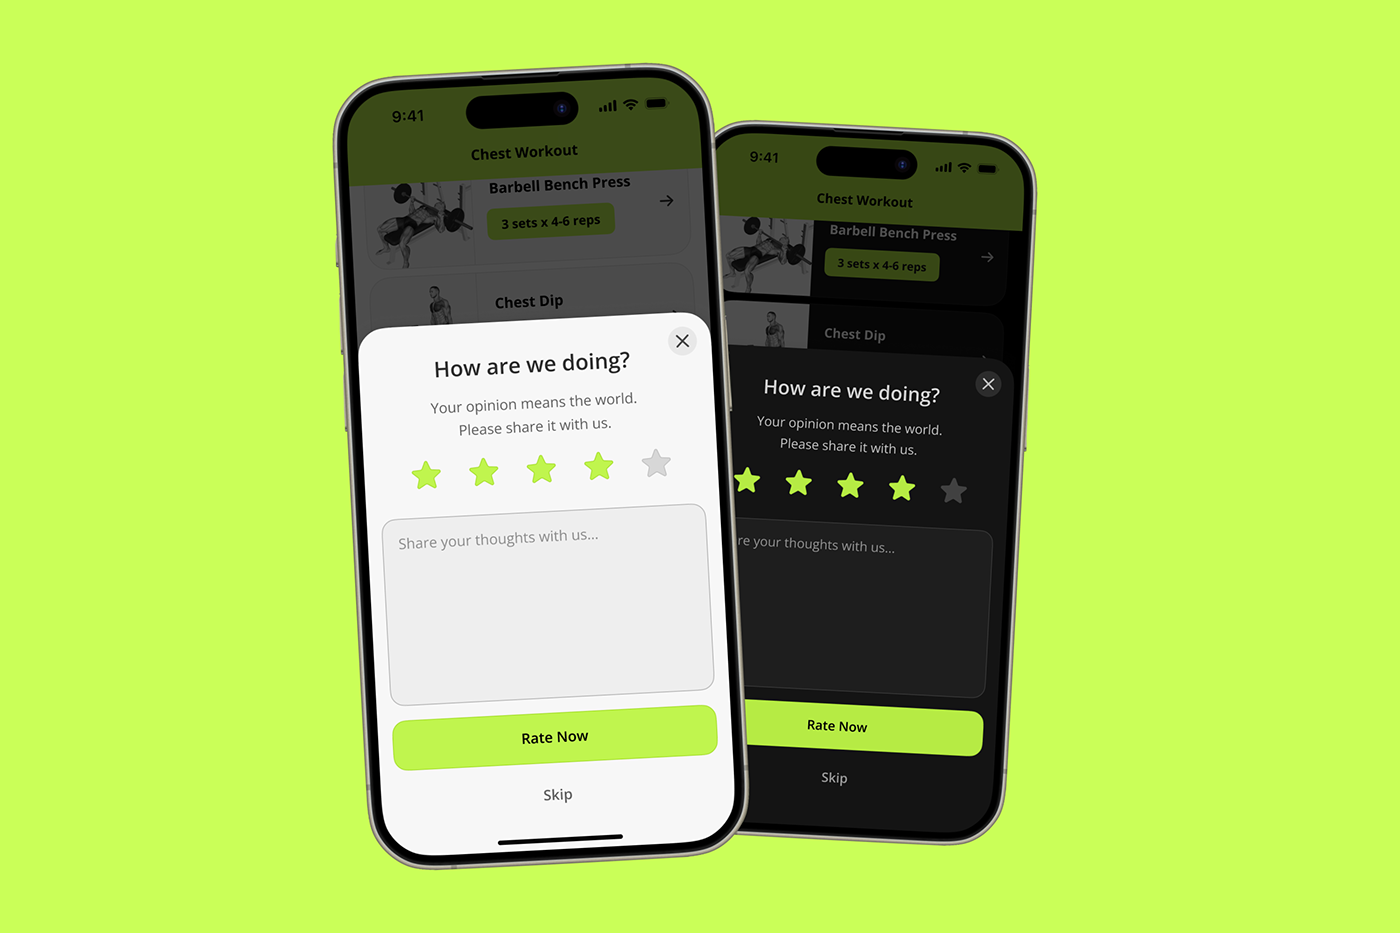 pop up Popup pop-up Overlay UI/UX user interface feedback rating gym workout